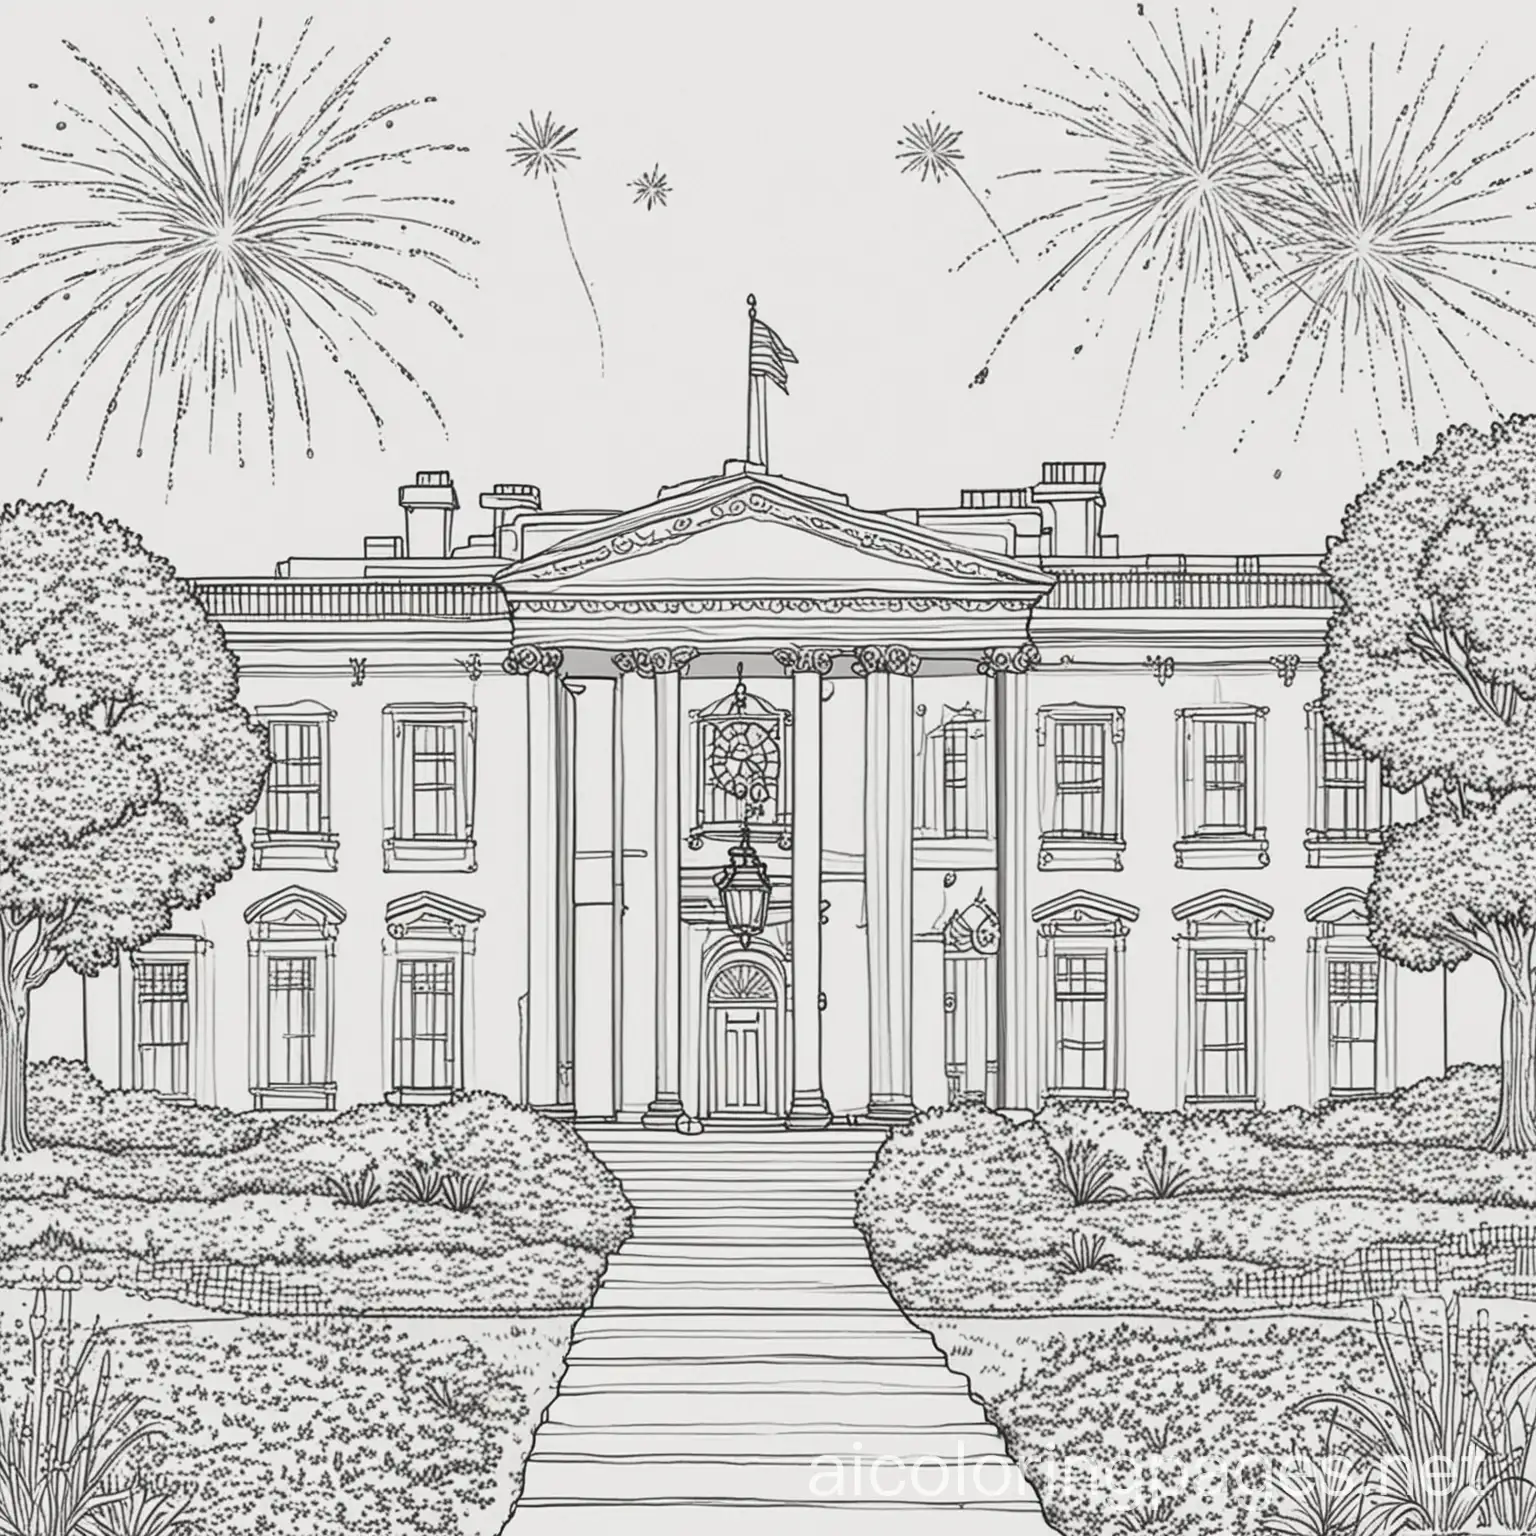 Majestic-White-House-with-Fireworks-Coloring-Page-for-Kids